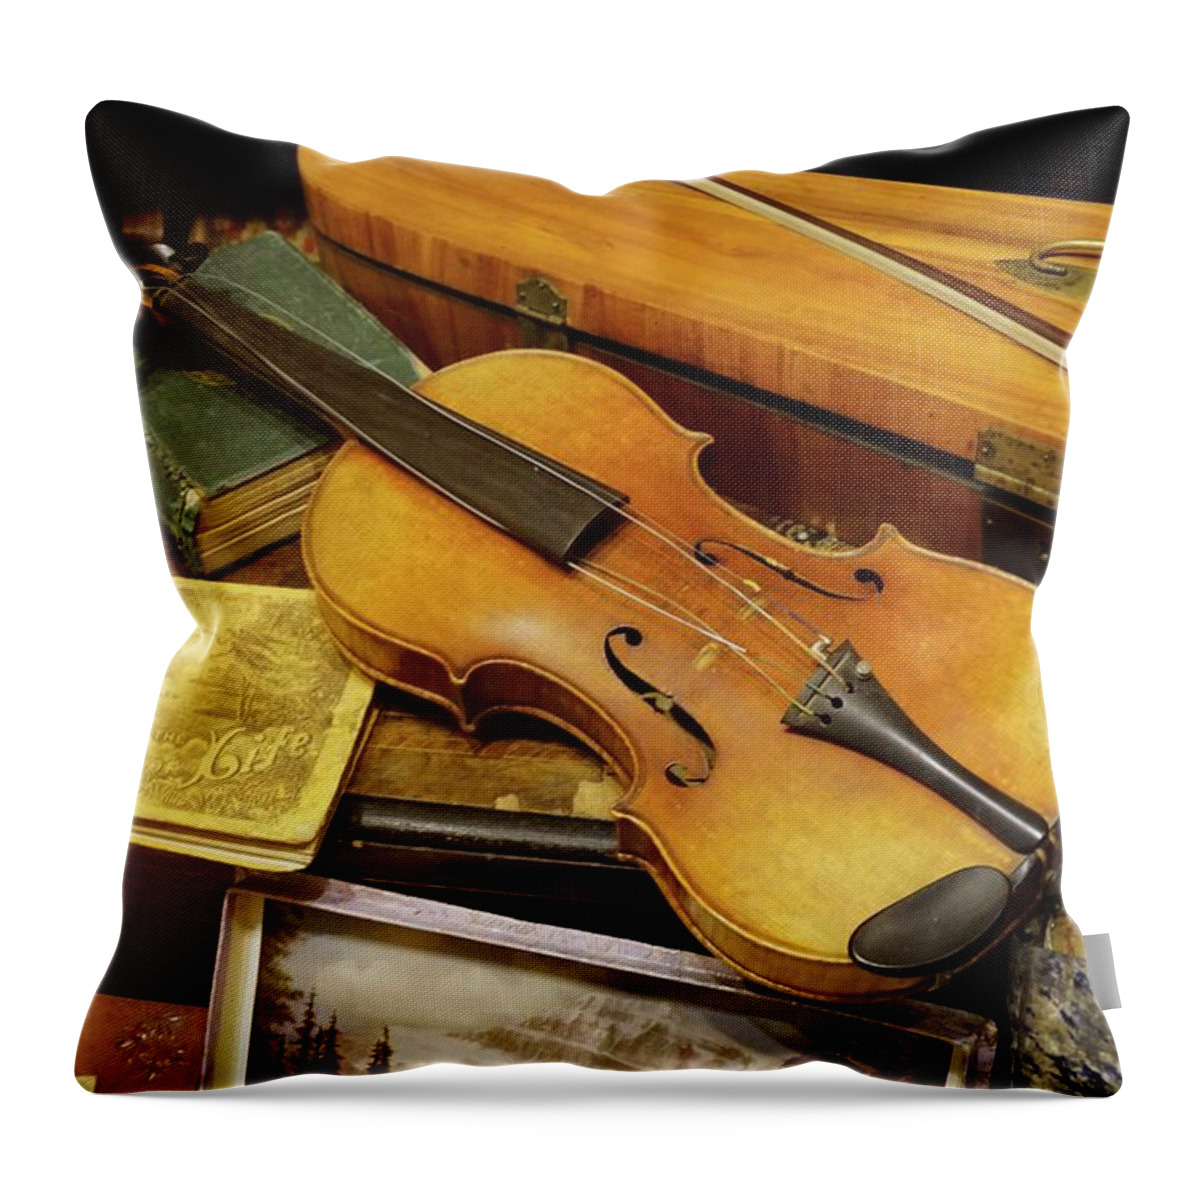 Violin Throw Pillow featuring the photograph Vintage Violin by Sandra Lee Scott